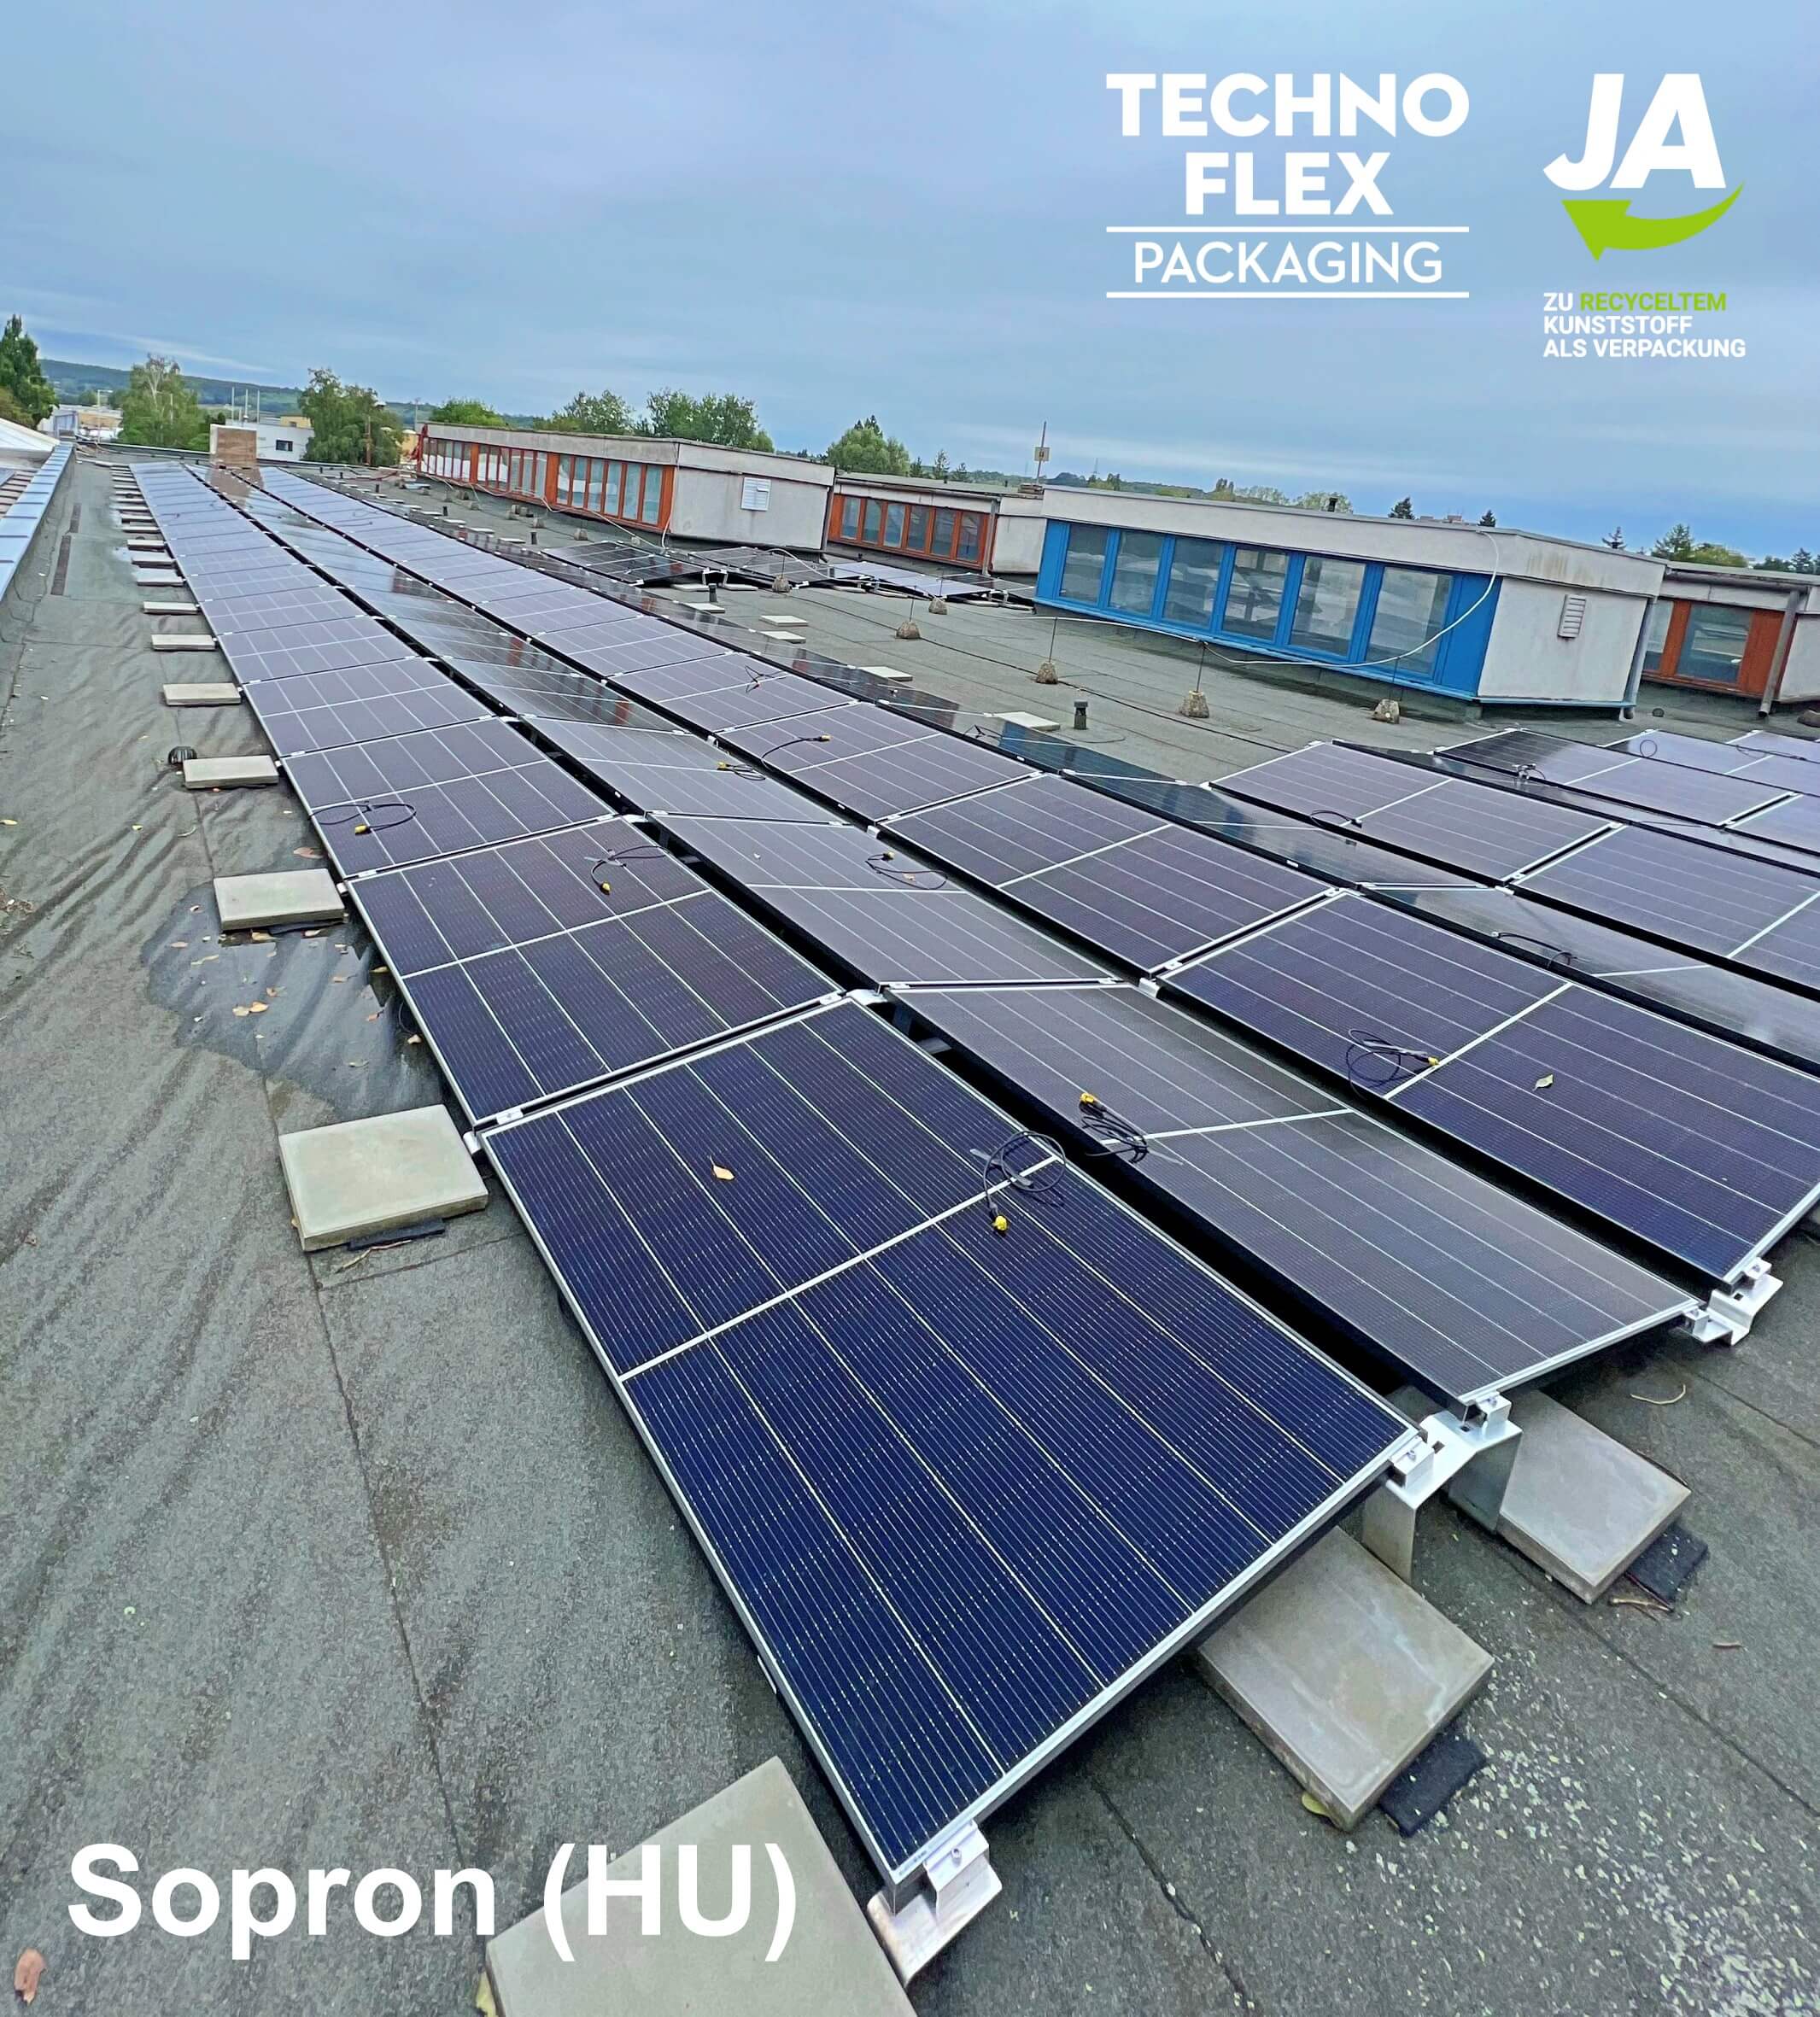 Photovoltaic systems put into operation at both locations (AT & HU) 2